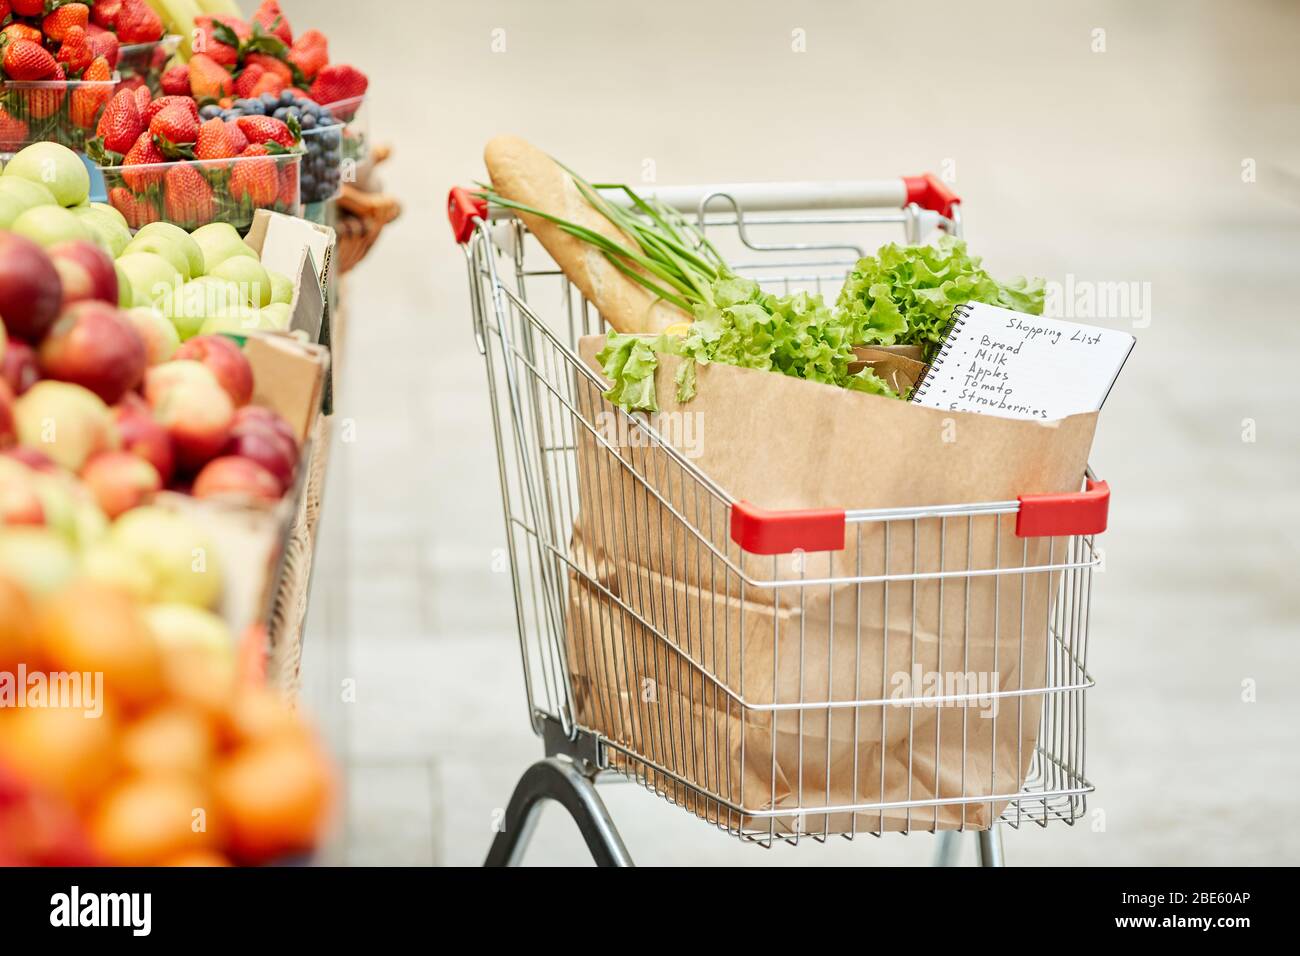 Background image of shopping cart with fresh groceries in supermarket, copy space, no people Stock Photo